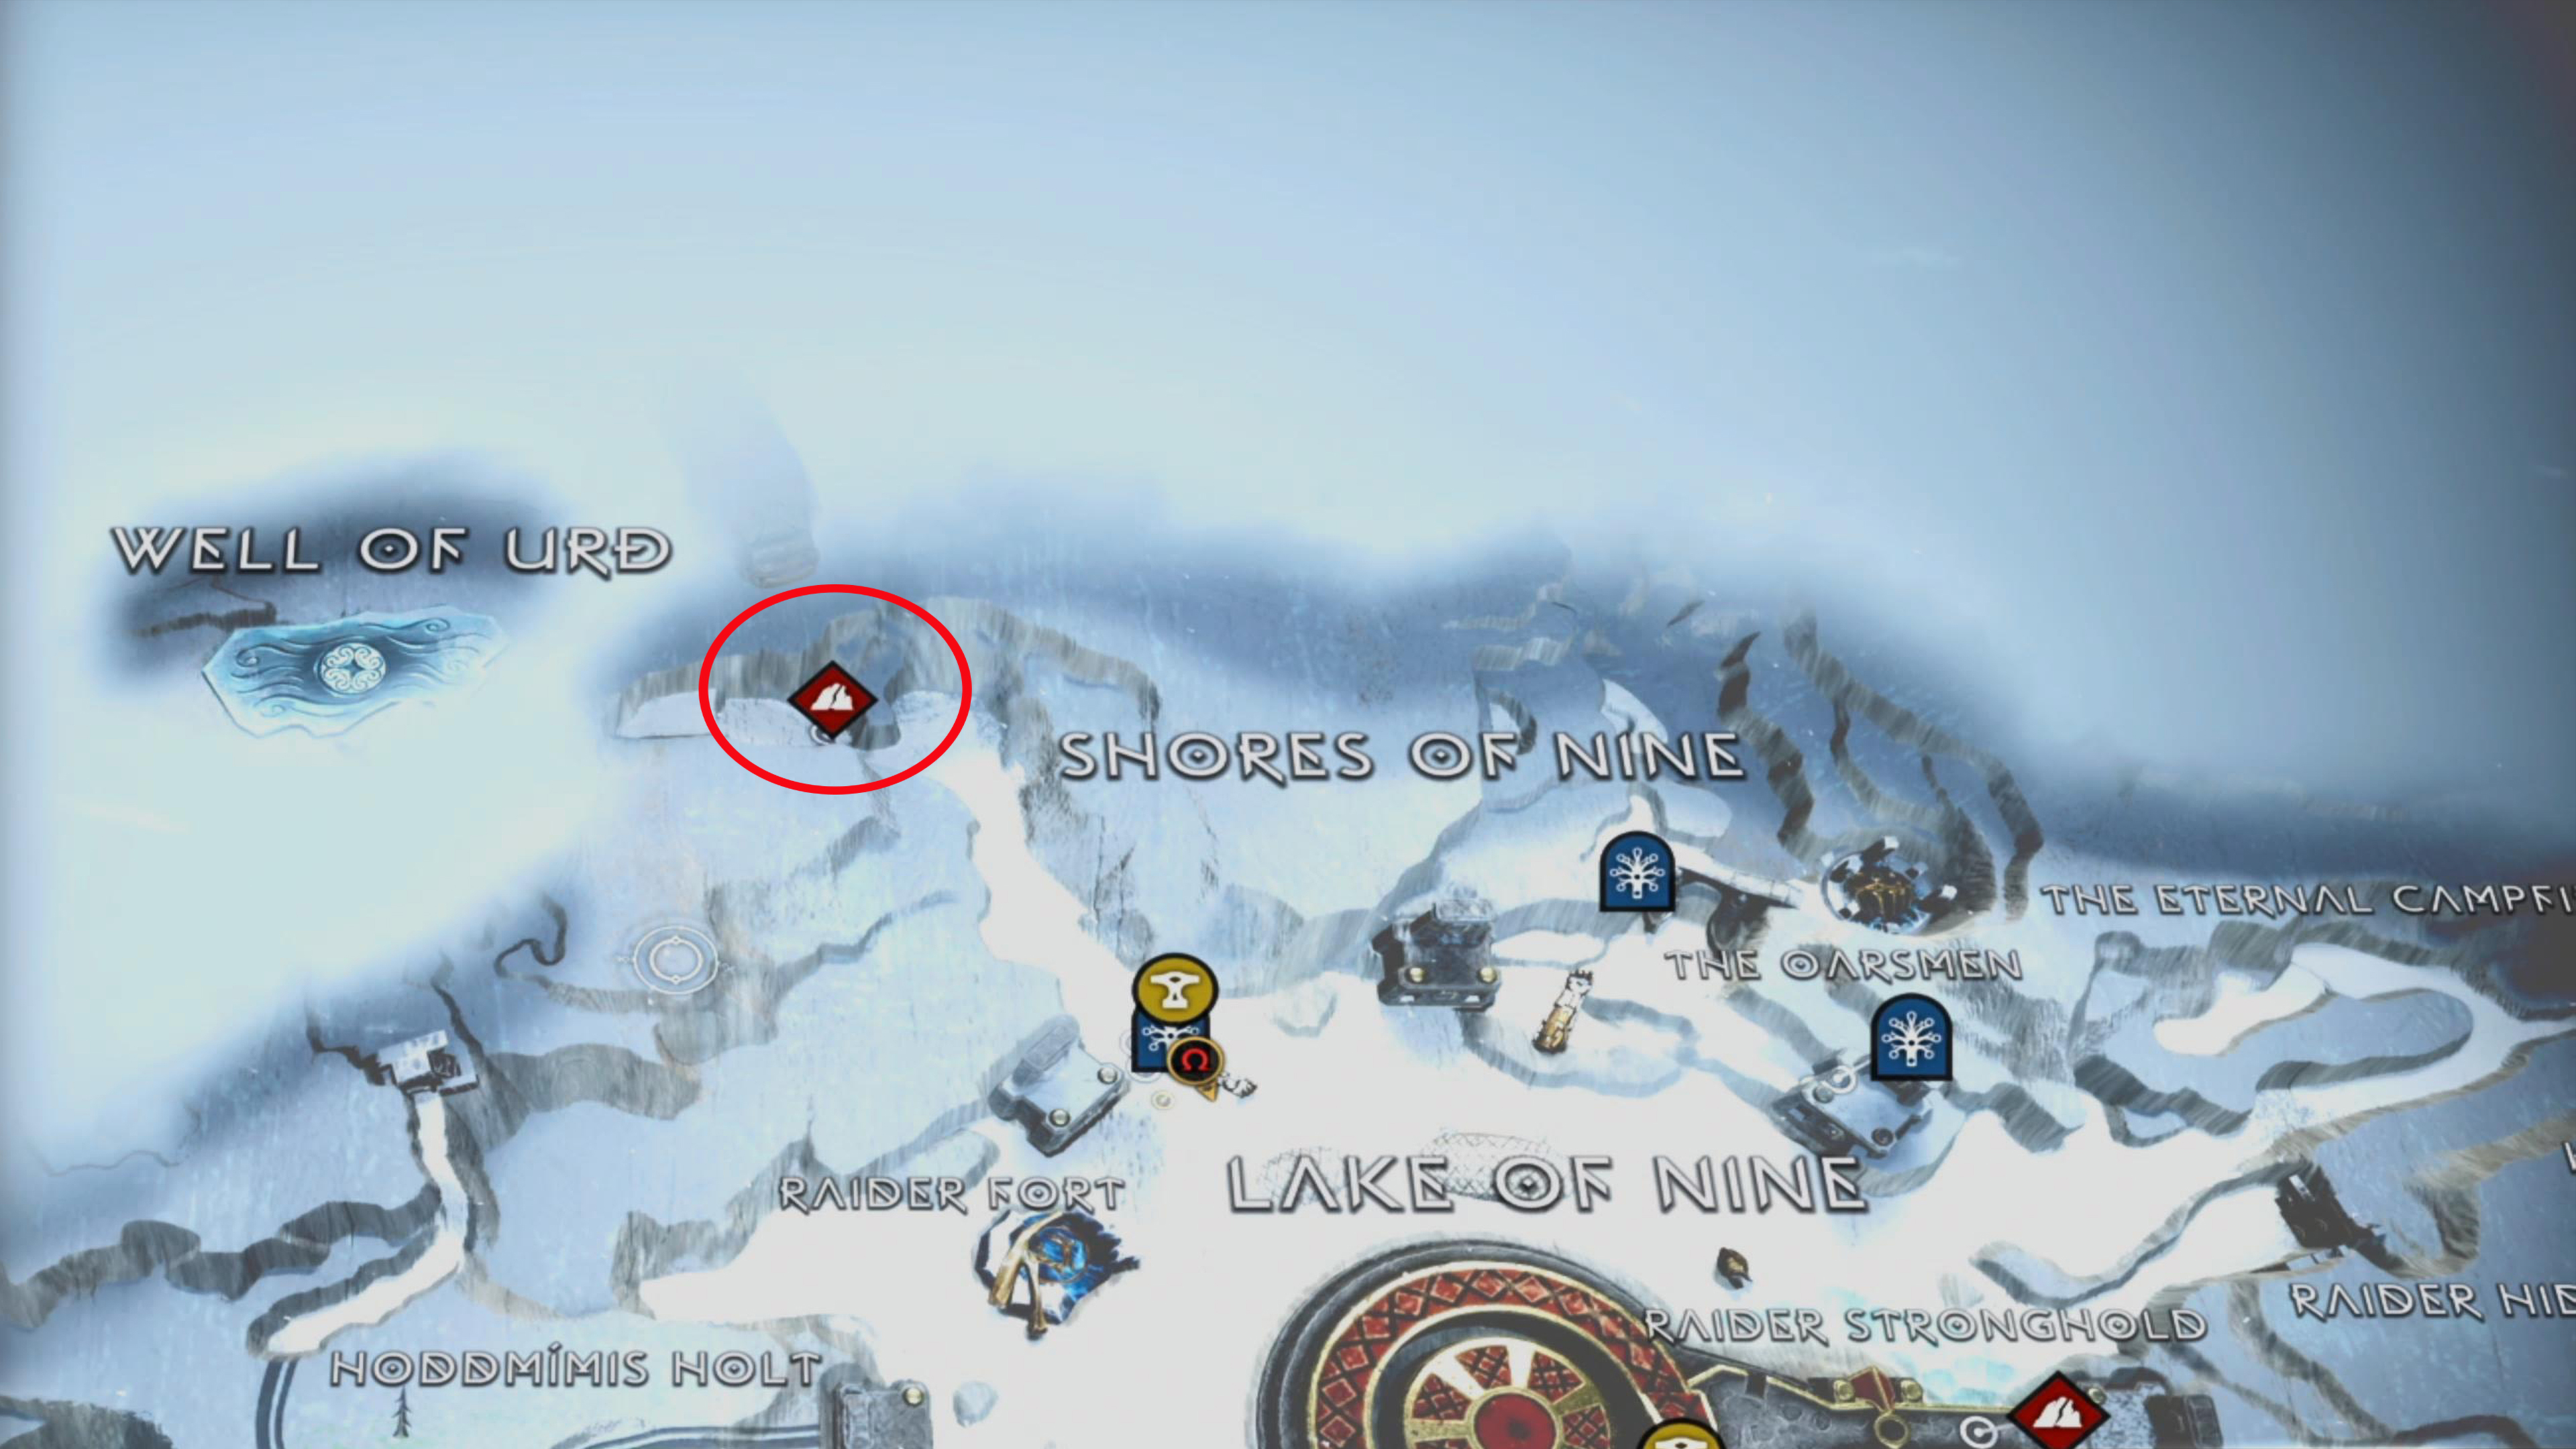 The Well of Urd camp can be found in the northwest of the Lake of Nine.